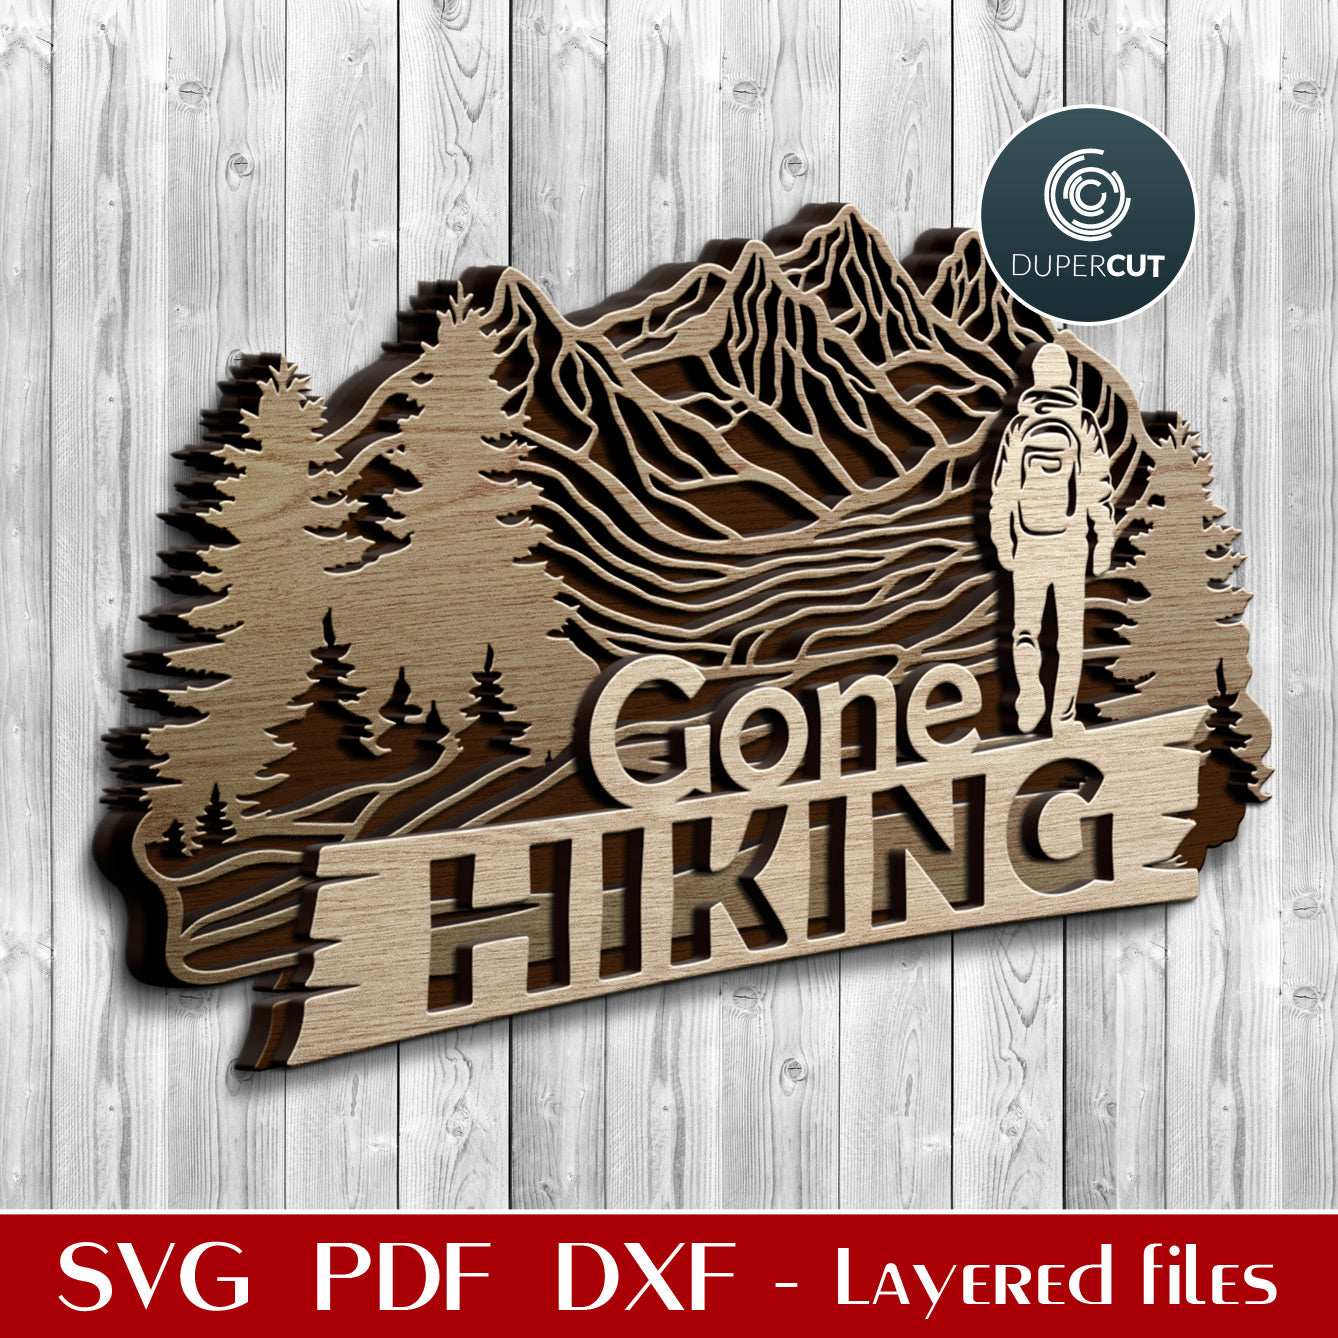 Gone hiking mountains trees nature sign - SVG DXF layered cut files for laser and digital machines Glowforge, Xtool, Cricut, CNC plasma machines, scroll saw pattern by www.DuperCut.com